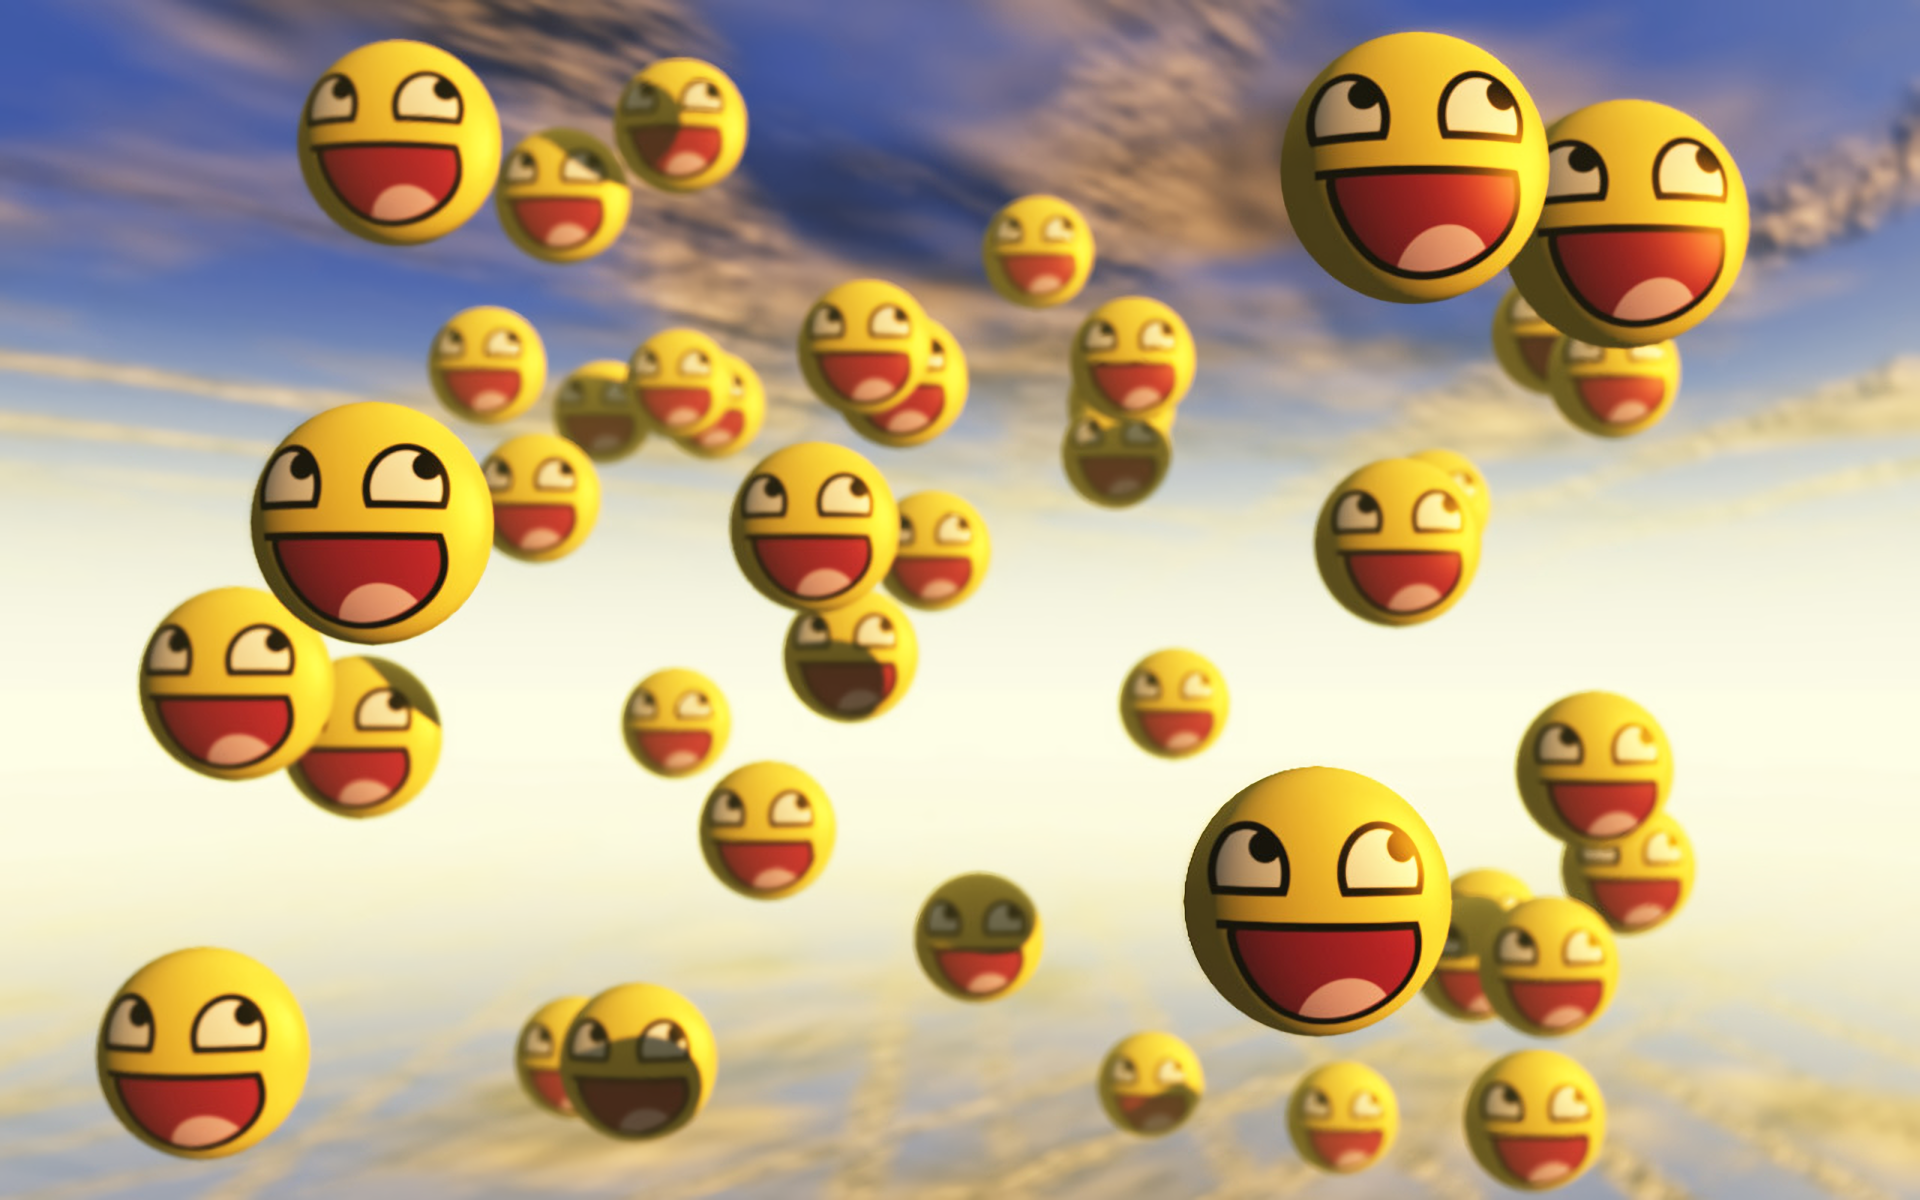 Smiley Images Hd - HD Wallpaper 